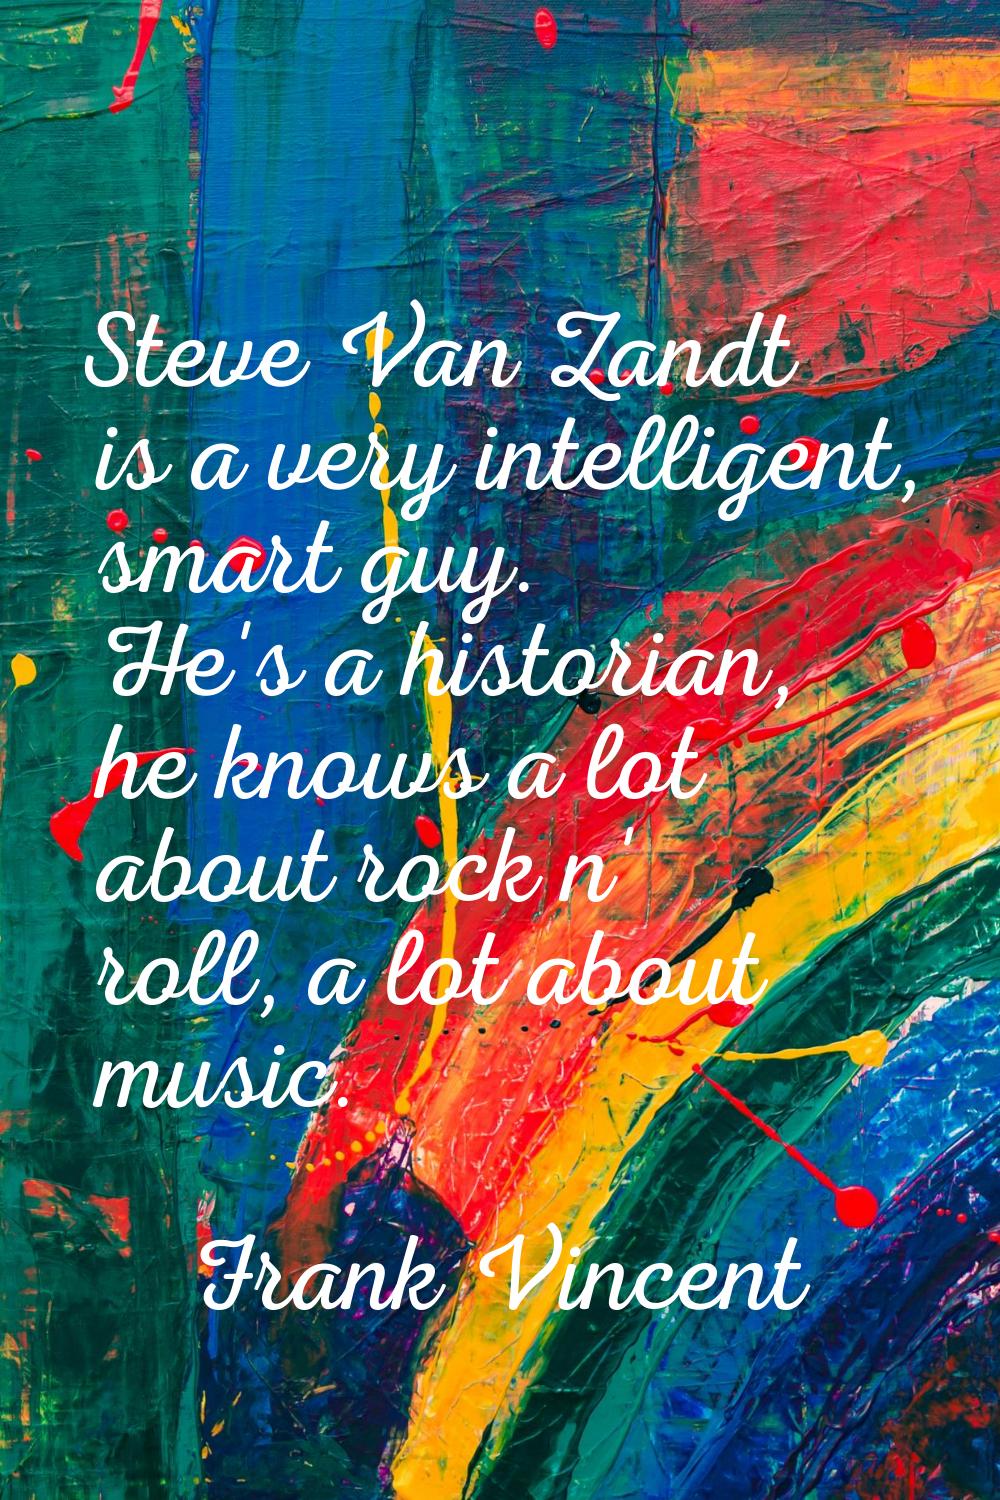 Steve Van Zandt is a very intelligent, smart guy. He's a historian, he knows a lot about rock n' ro